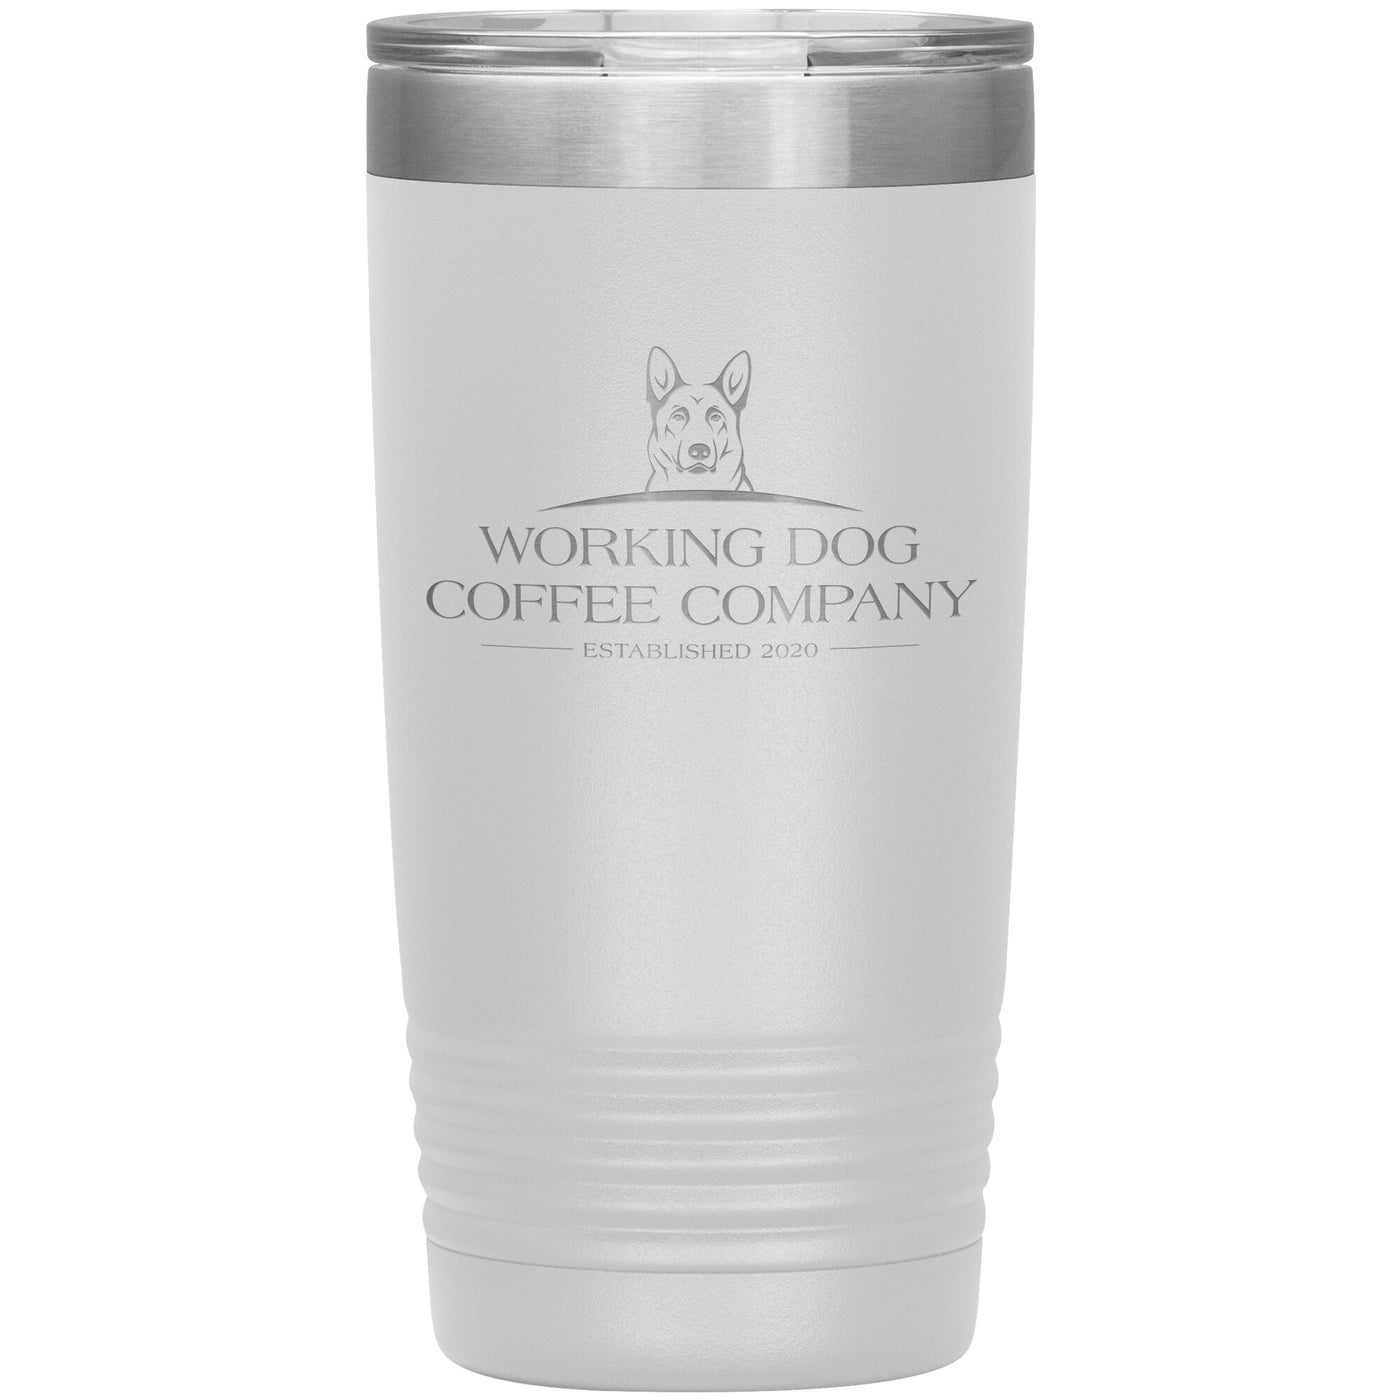 Working Dog Coffee Company - Established 2020, 20oz Stainless Tumbler